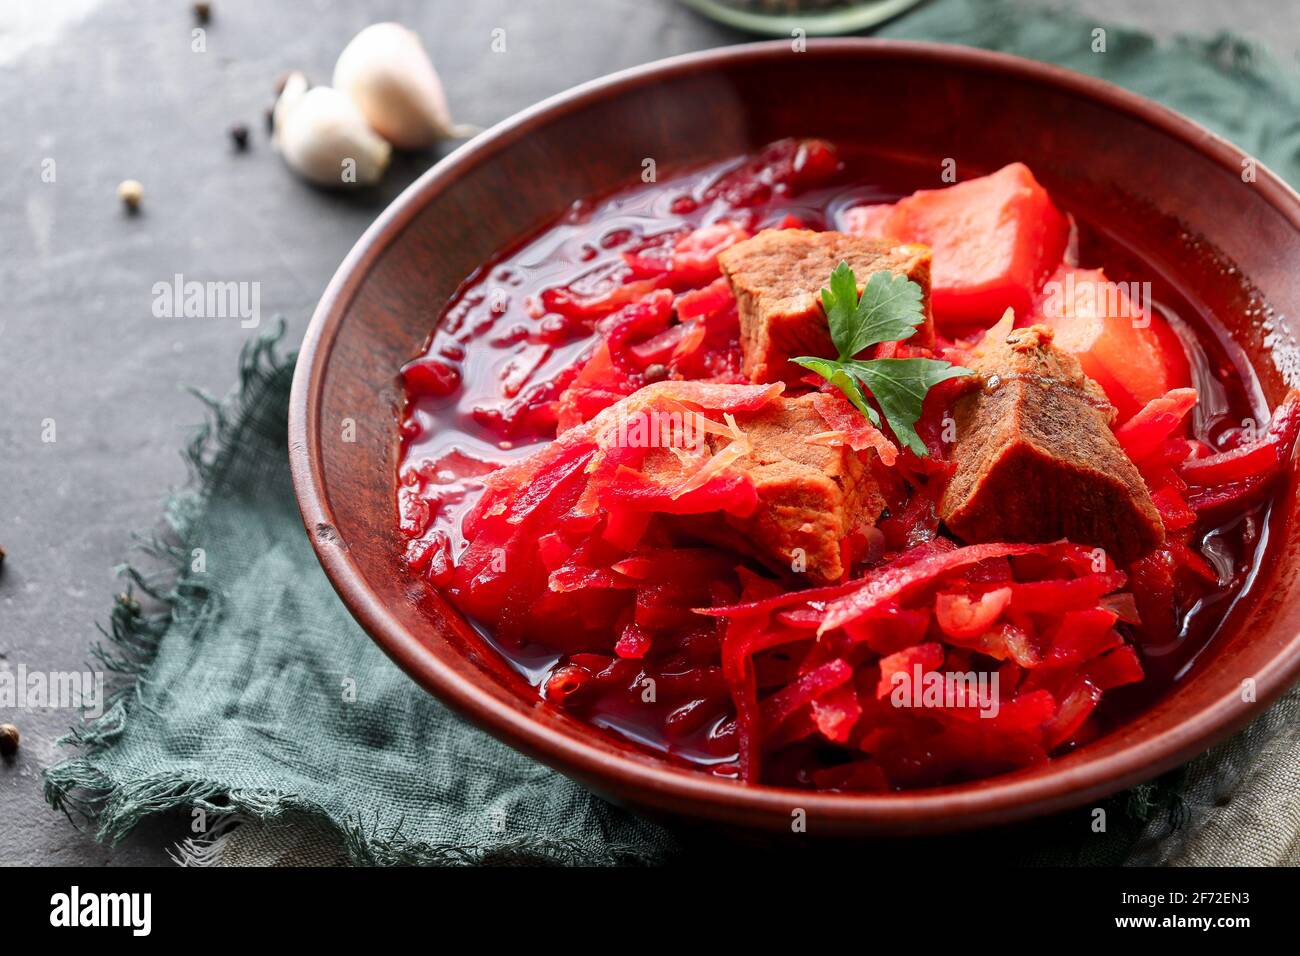 Red borsch with vegetables and meat in a clay plate. Steam from hot tomato soup. Dark background. Delicious healthy lunch. Copy space Stock Photo